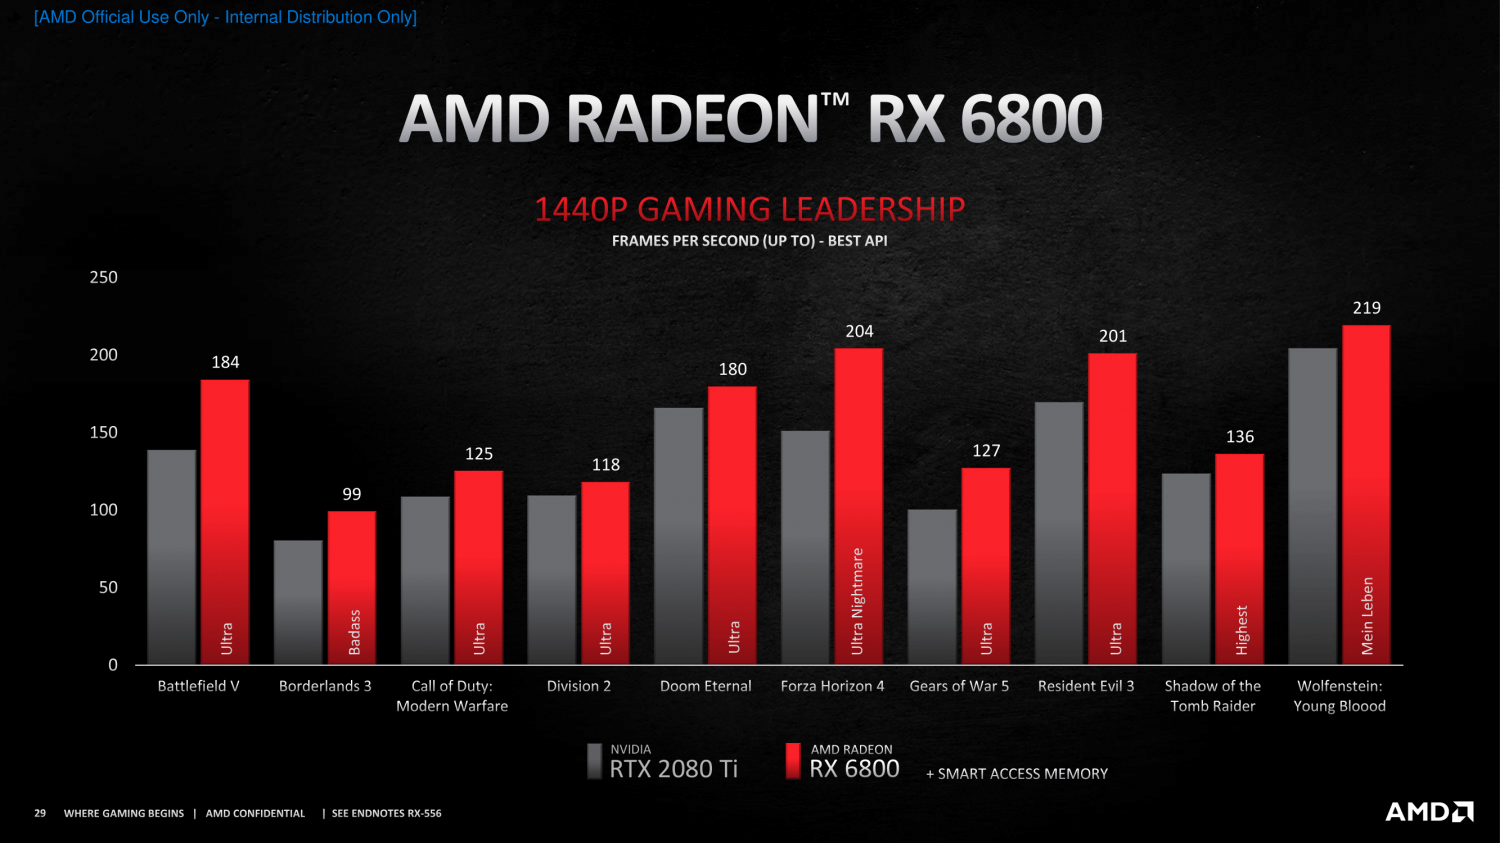 AMD Radeon RX 6800 XT and Radeon RX 6800 Review